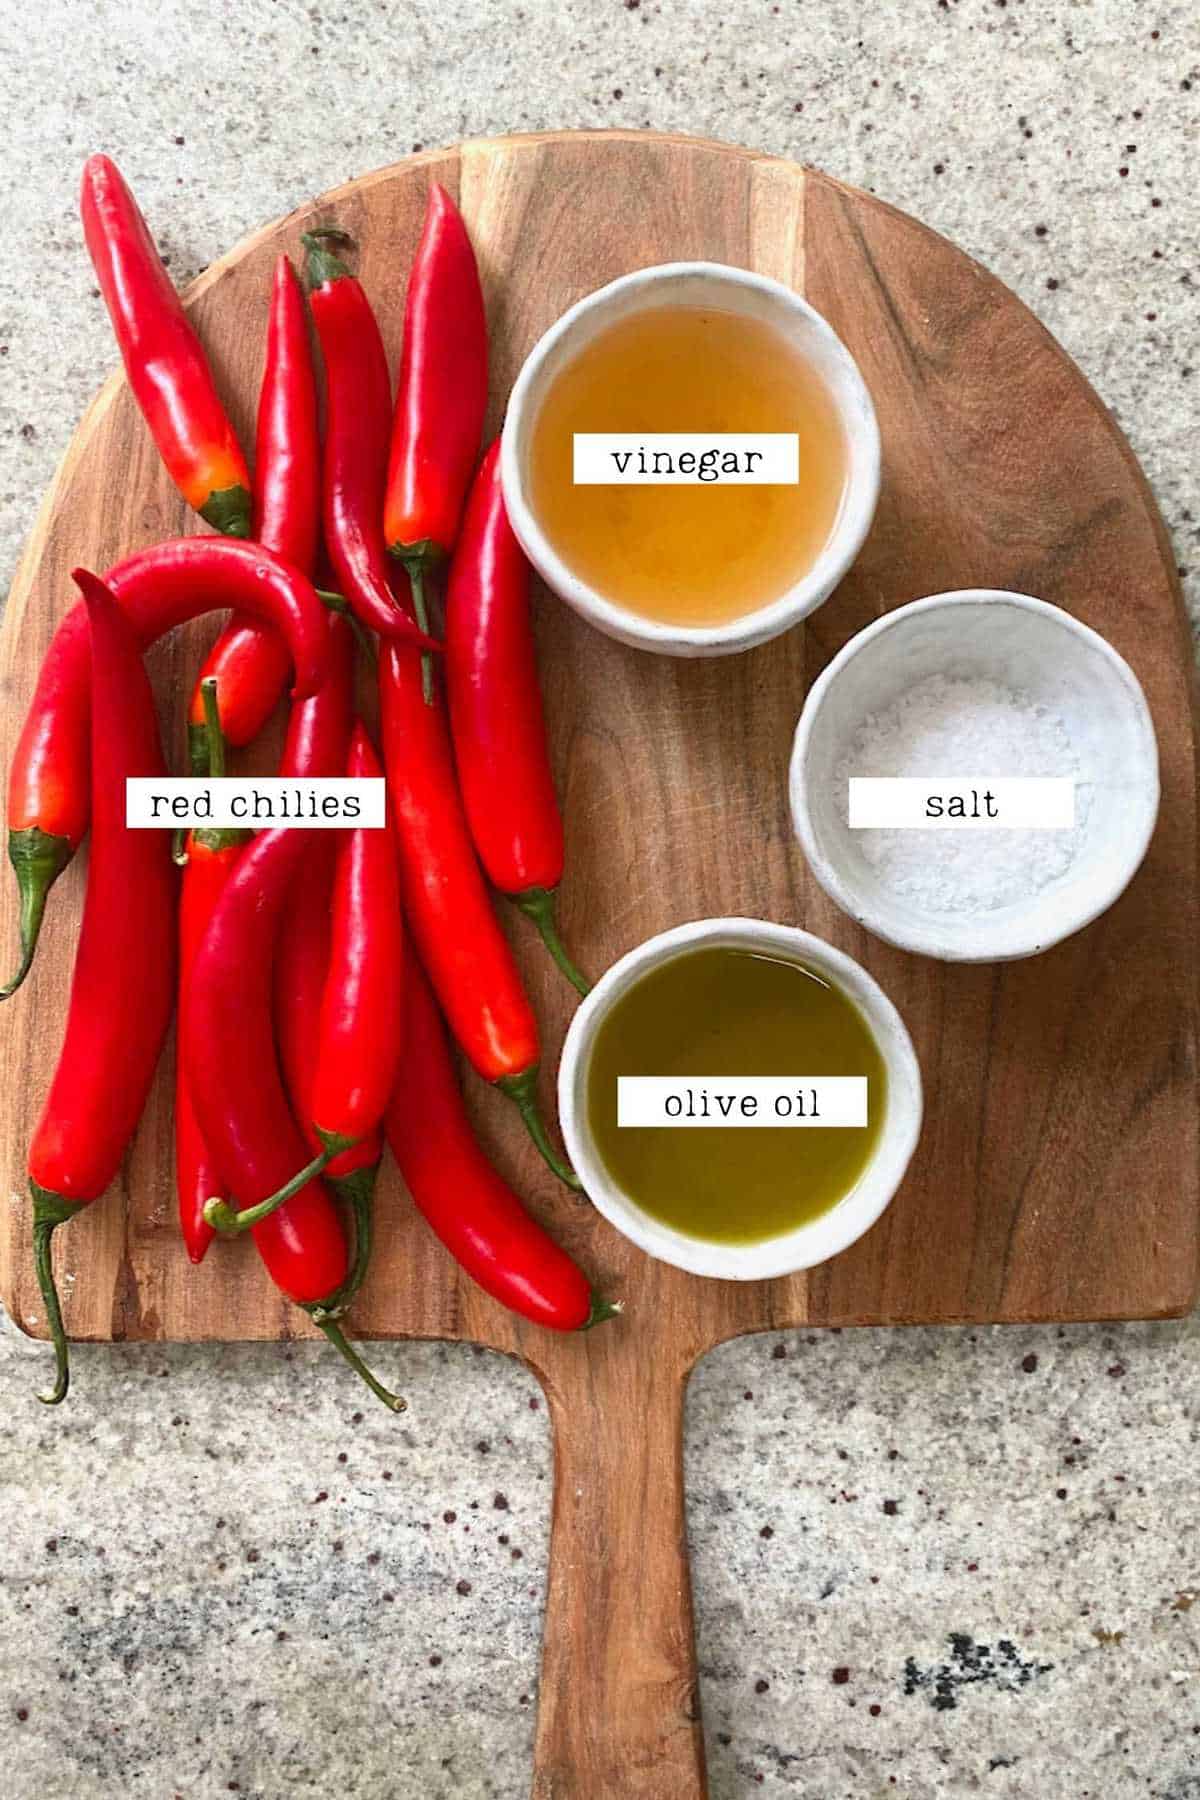 Ingredients for Chili Sauce